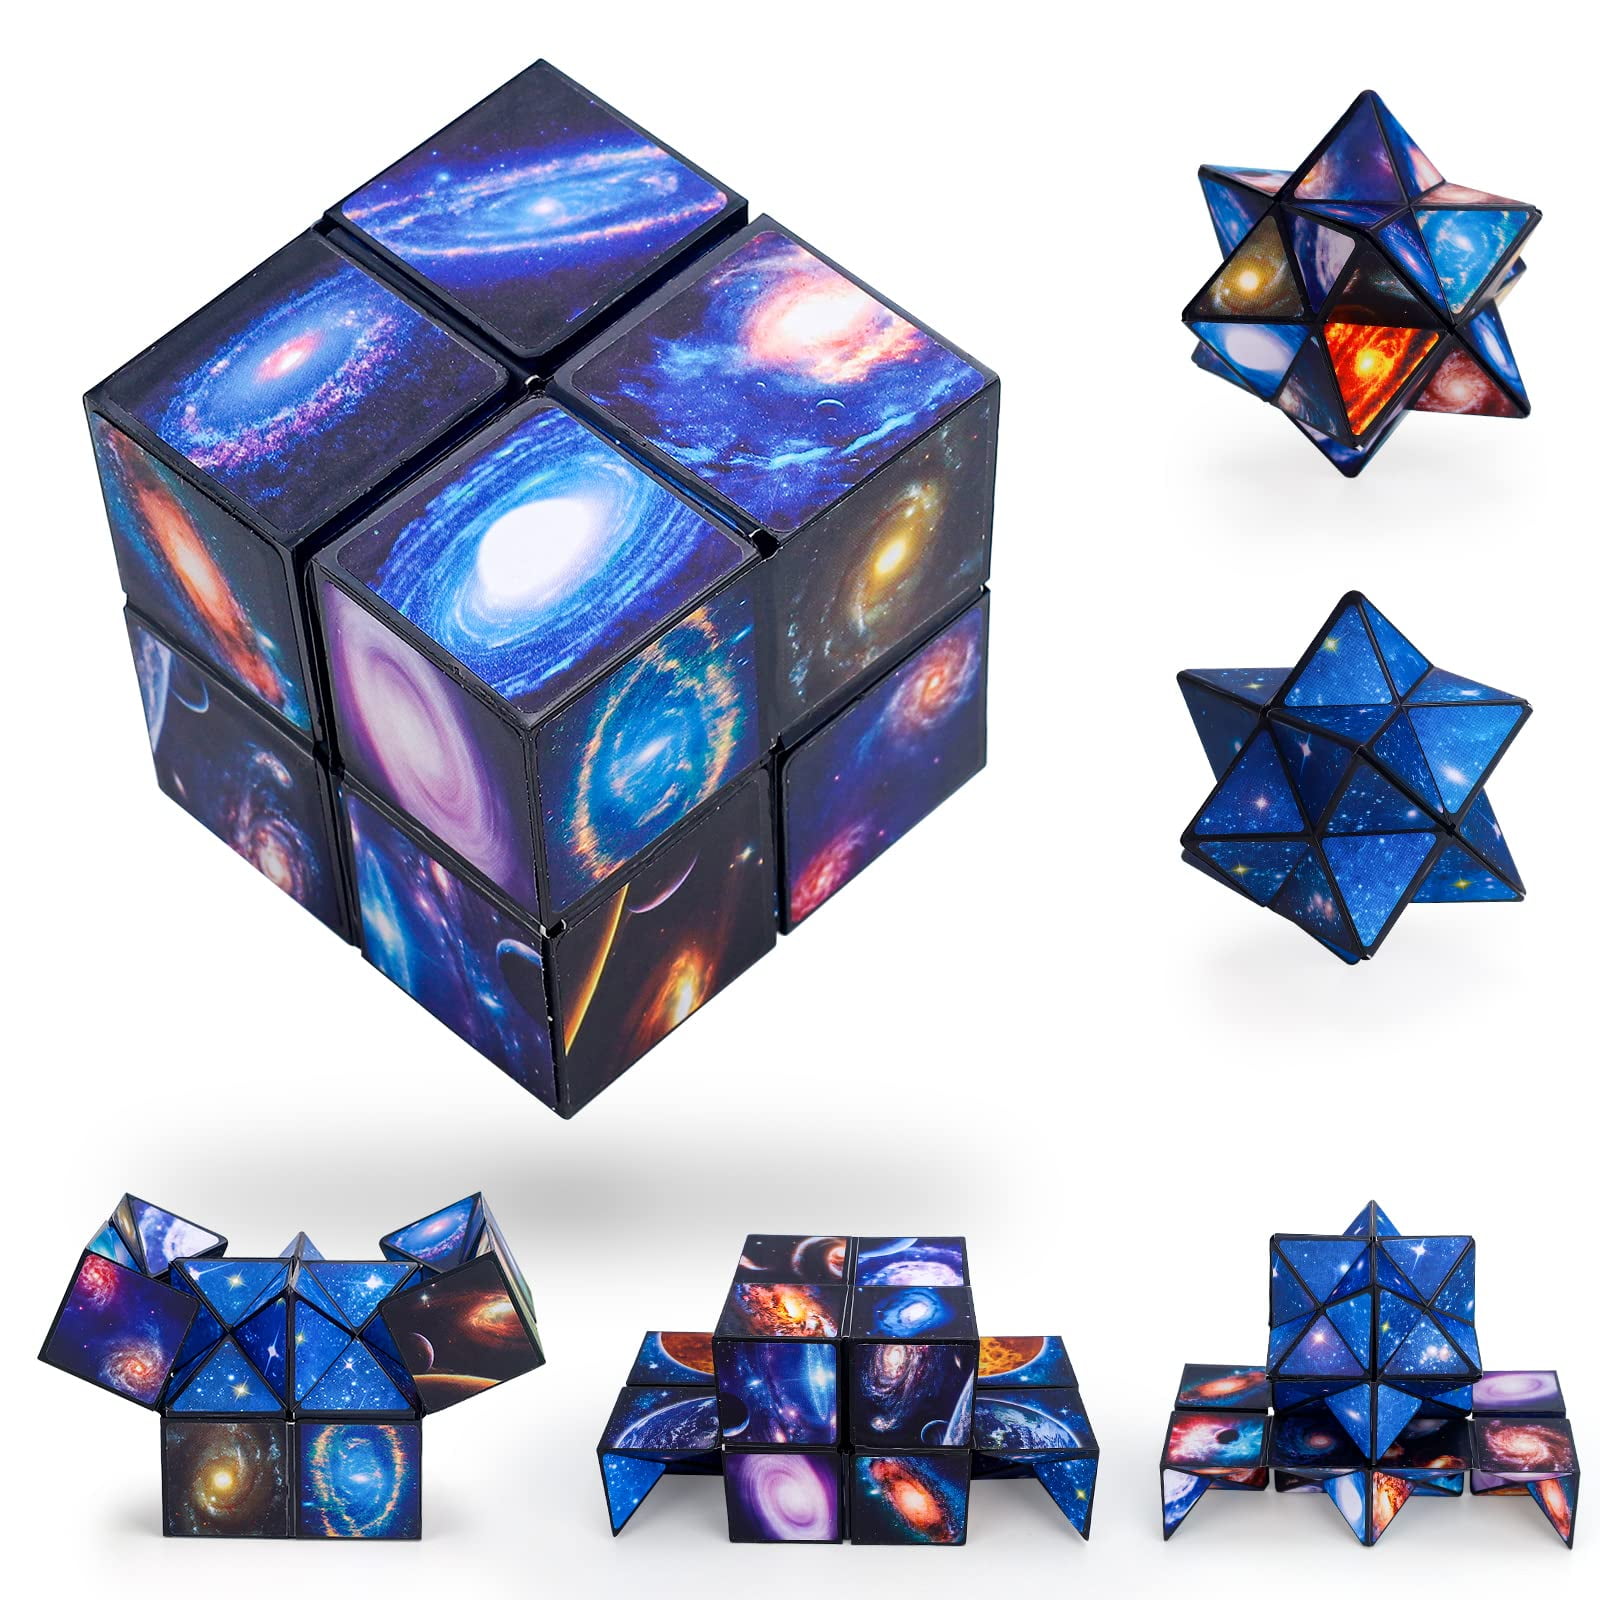 Details about   Magic Infinite Cube Stress Relief Infinity Flip Puzzle Anxiety Reliever Kids 